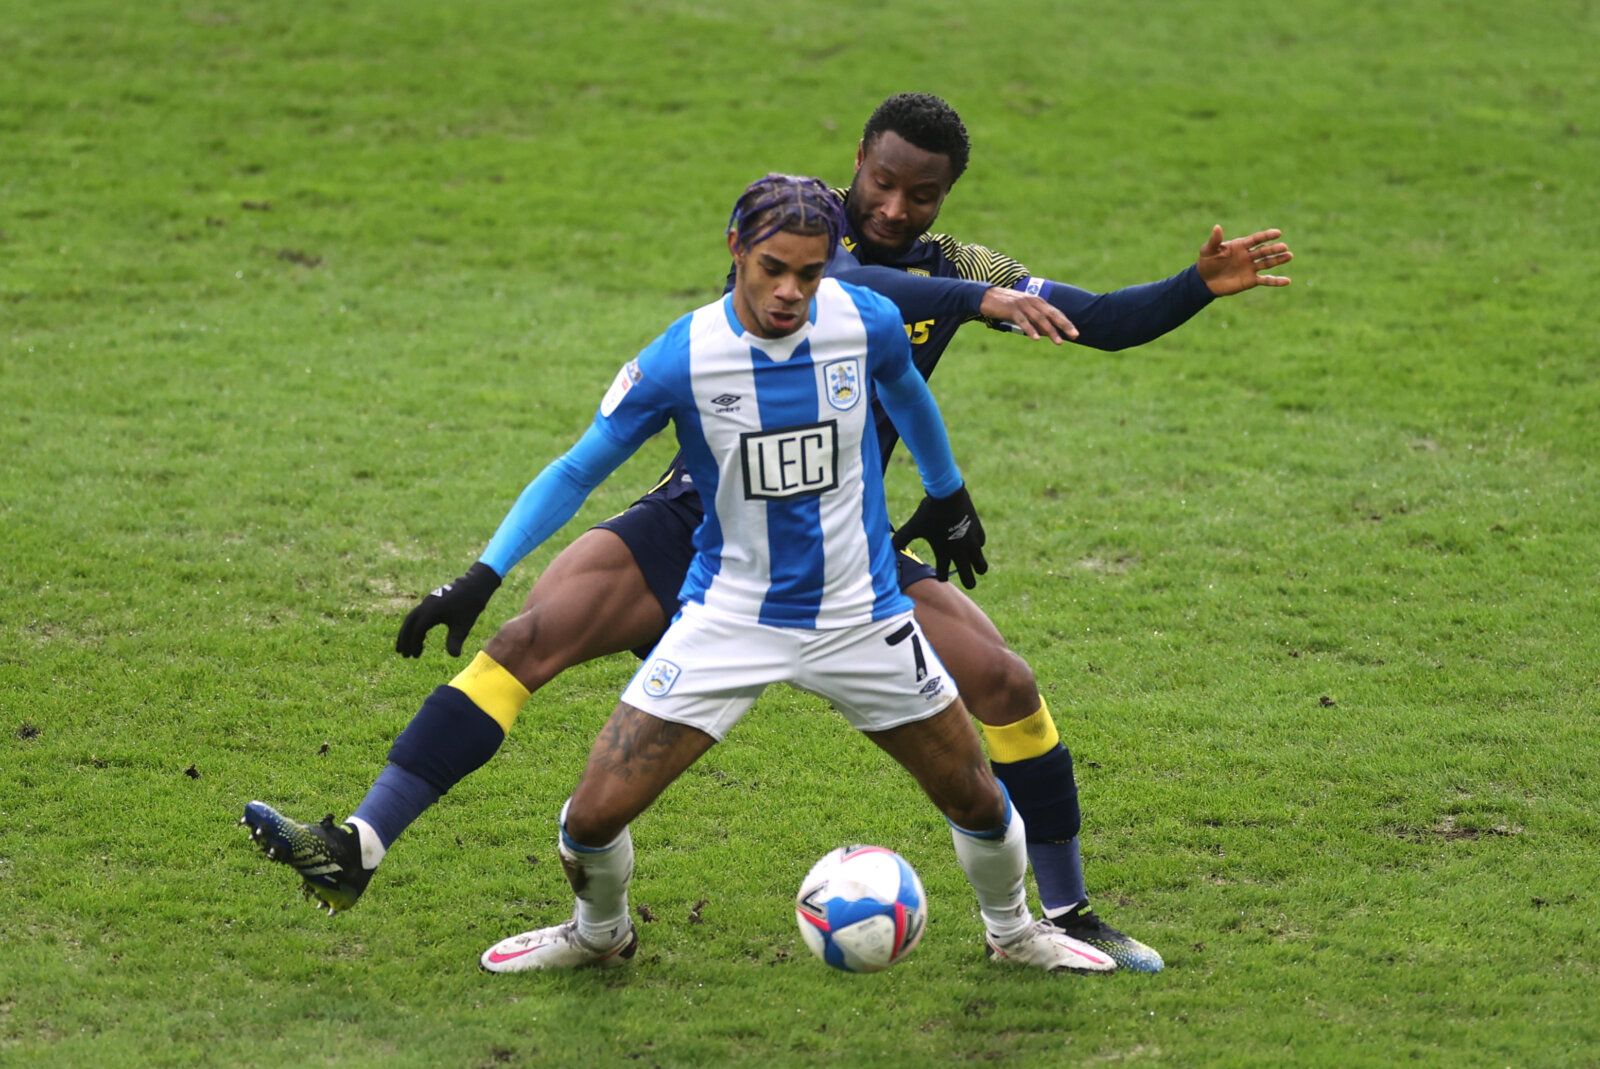 Soccer Football - Championship - Huddersfield Town v Stoke City - John Smith's Stadium, Huddersfield, Britain - January 30, 2021 Huddersfield Town's Juninho Bacuna in action with Stoke City's John Obi Mikel Action Images/Carl Recine EDITORIAL USE ONLY. No use with unauthorized audio, video, data, fixture lists, club/league logos or 'live' services. Online in-match use limited to 75 images, no video emulation. No use in betting, games or single club /league/player publications.  Please contact yo